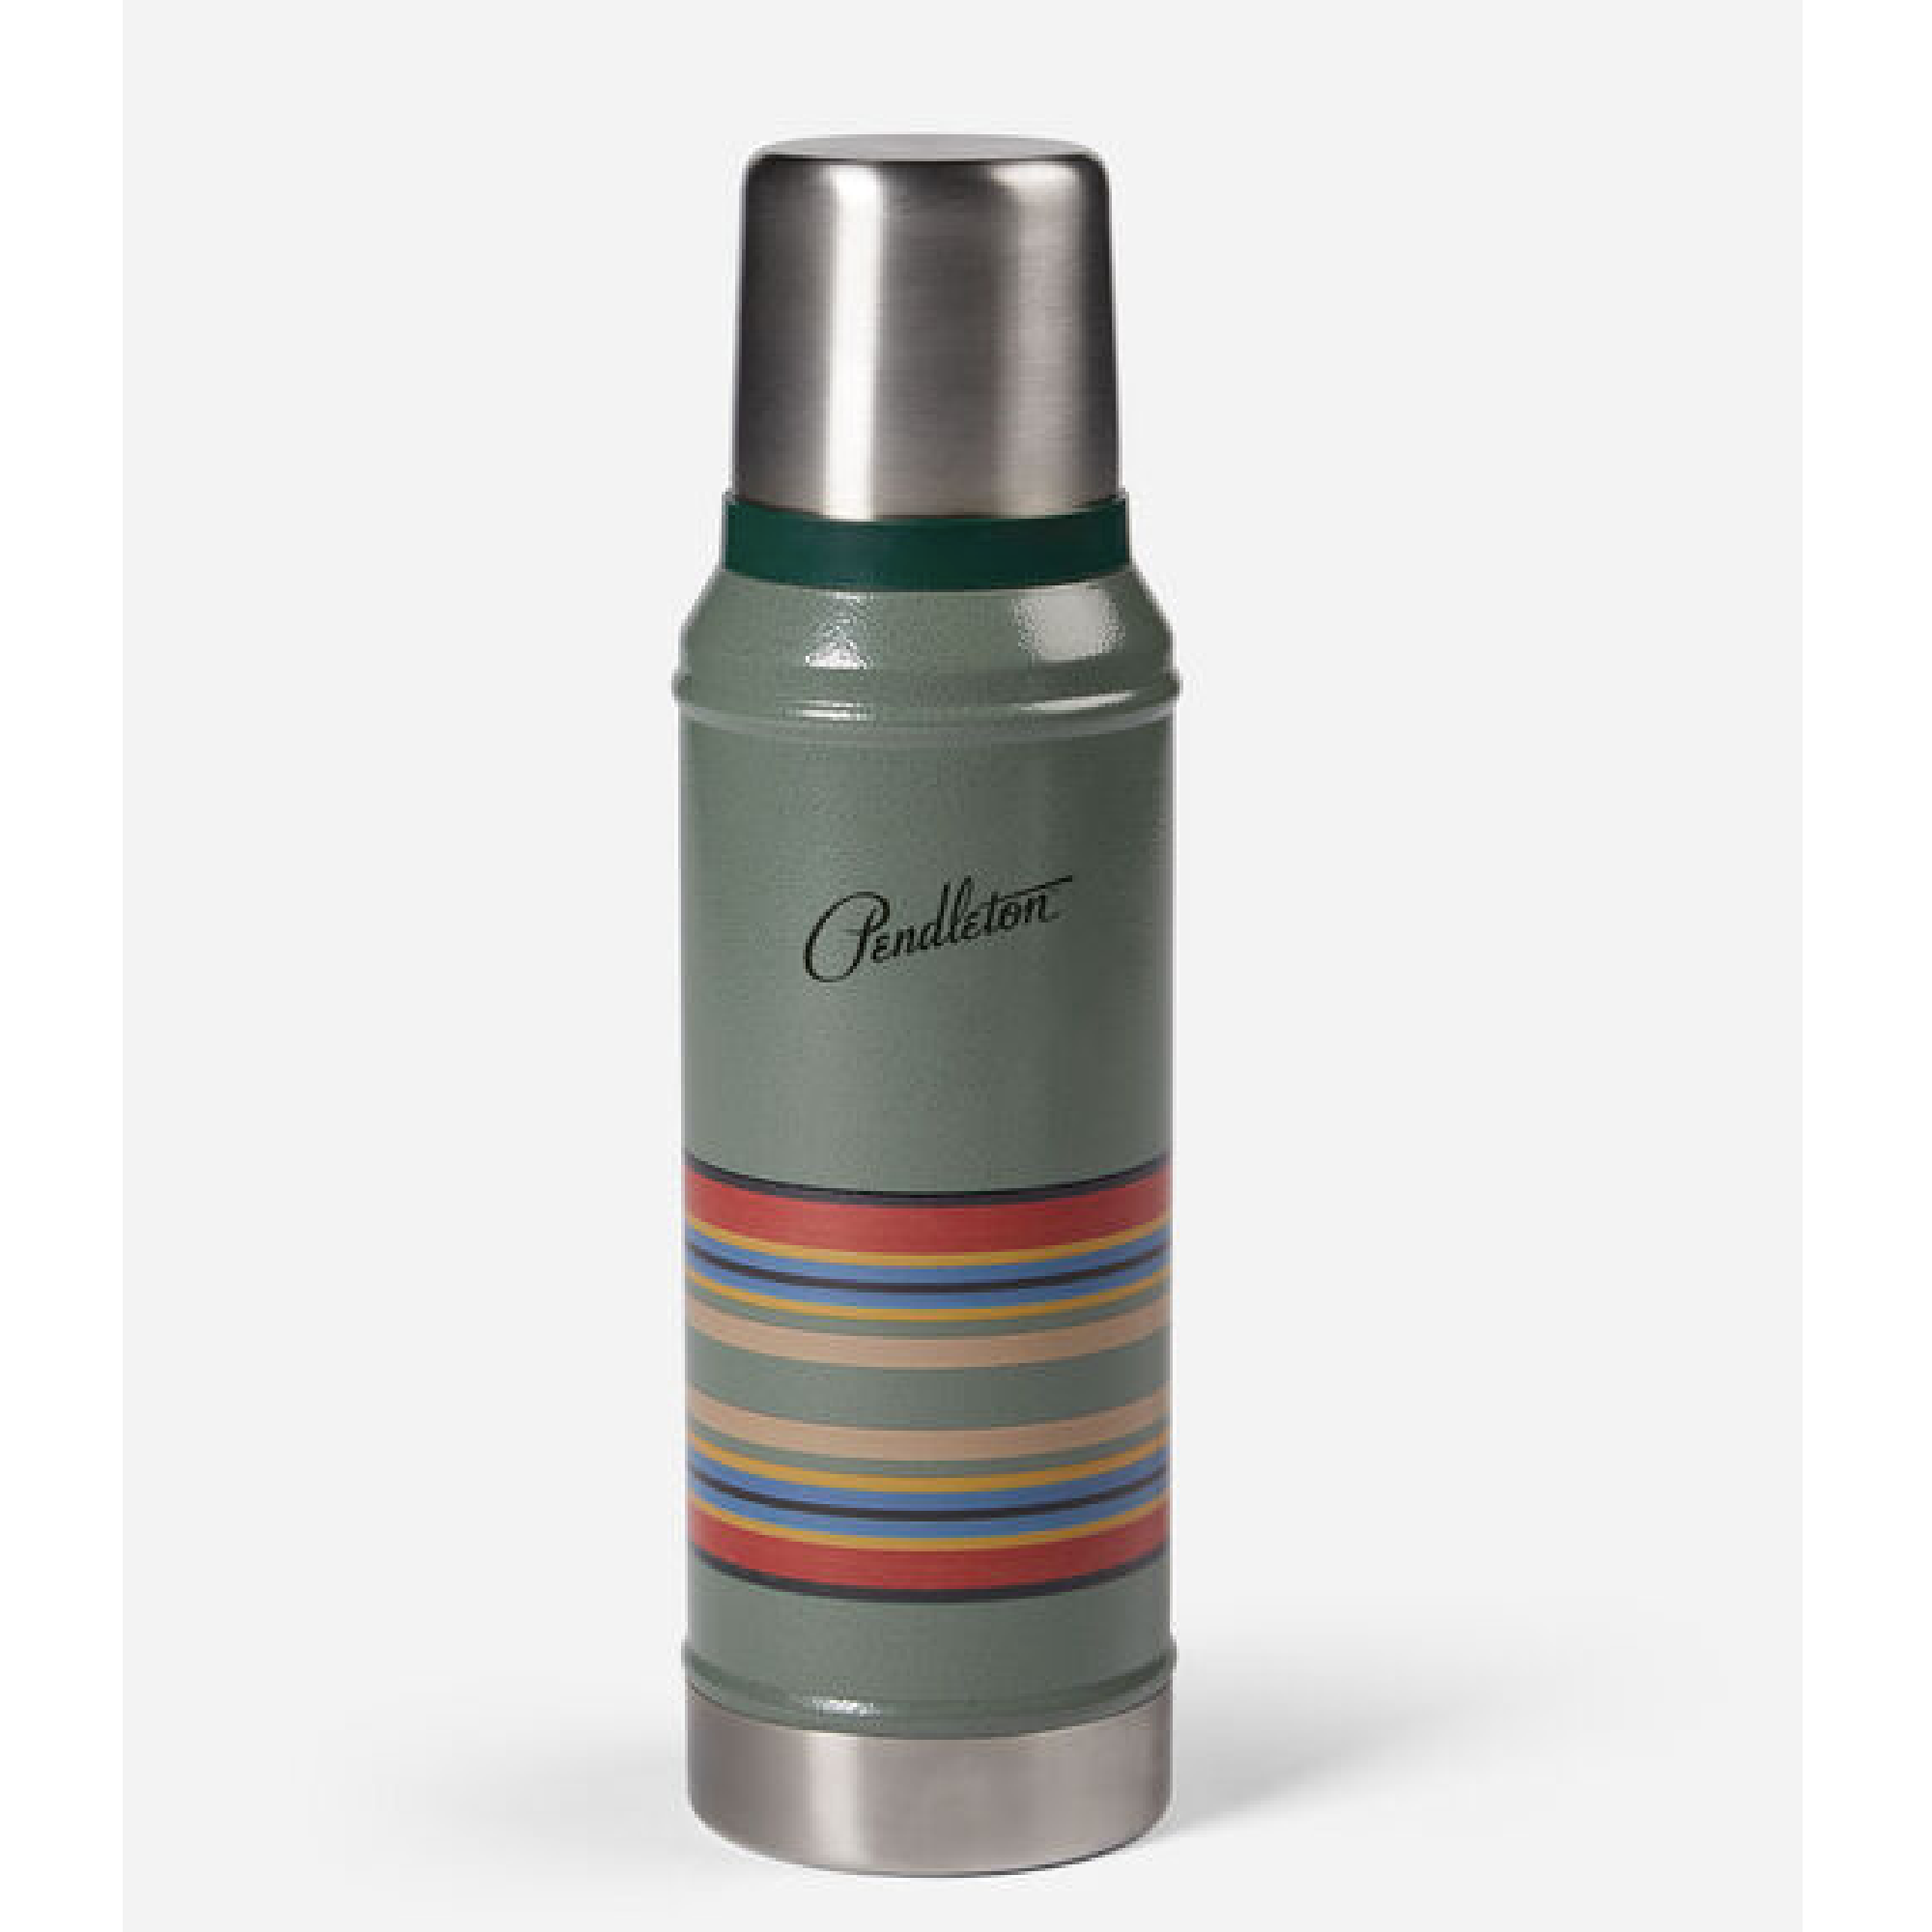 NEW! Stanley Pendleton Vacuum Bottle/Thermos - household items